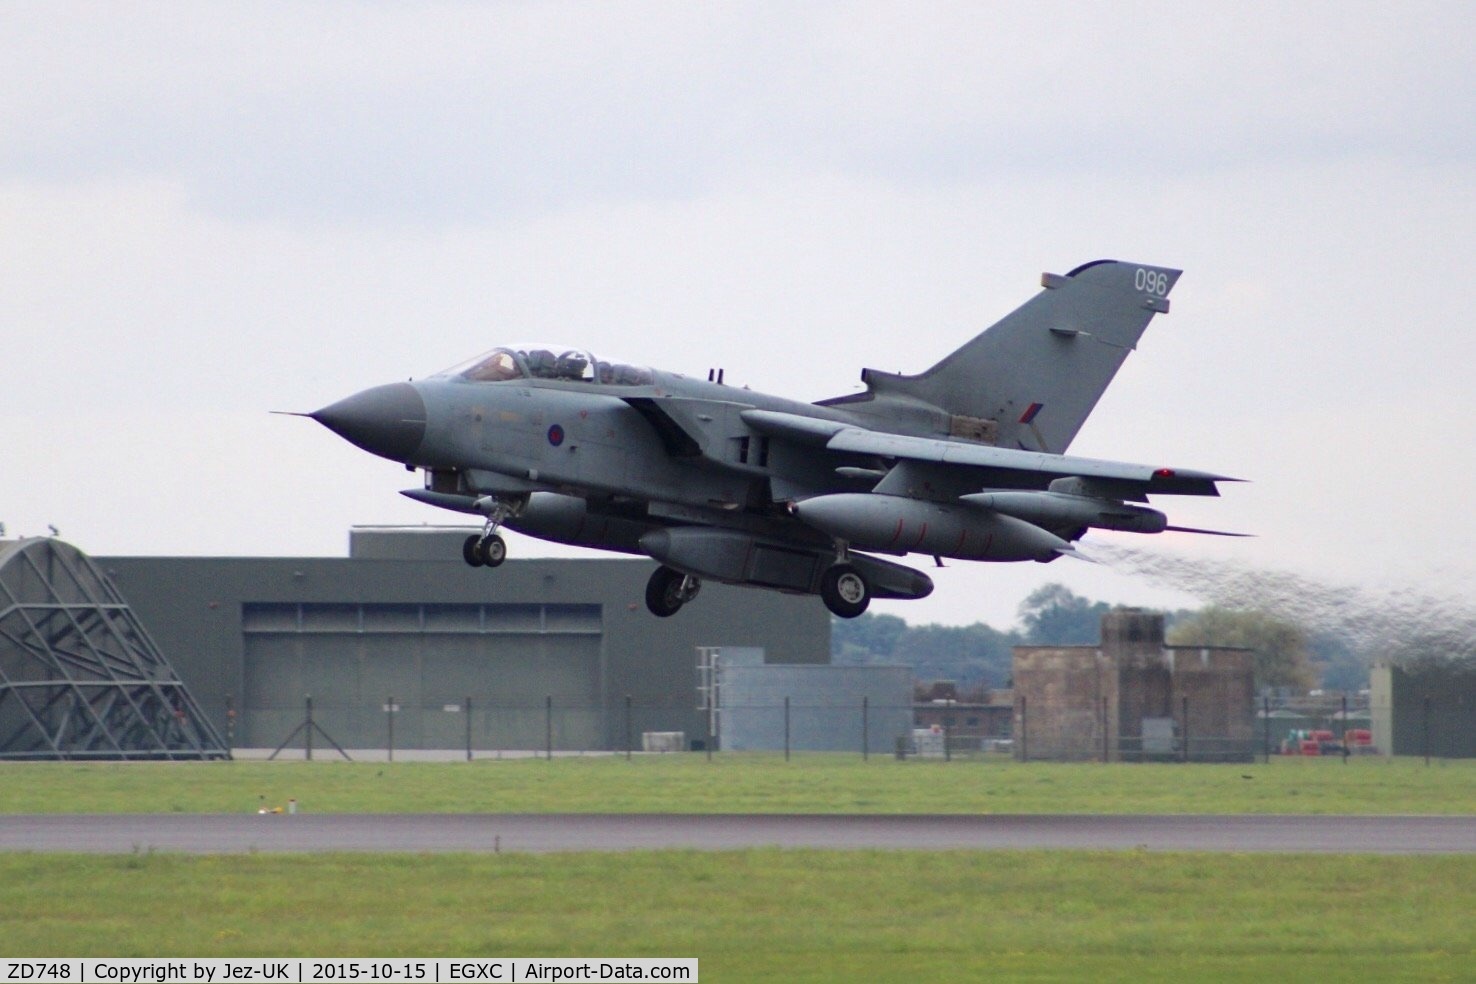 ZD748, 1984 Panavia Tornado GR.4 C/N 382/BS129/3176, wheels nearly retracted, stormy day takeoff, code 096,